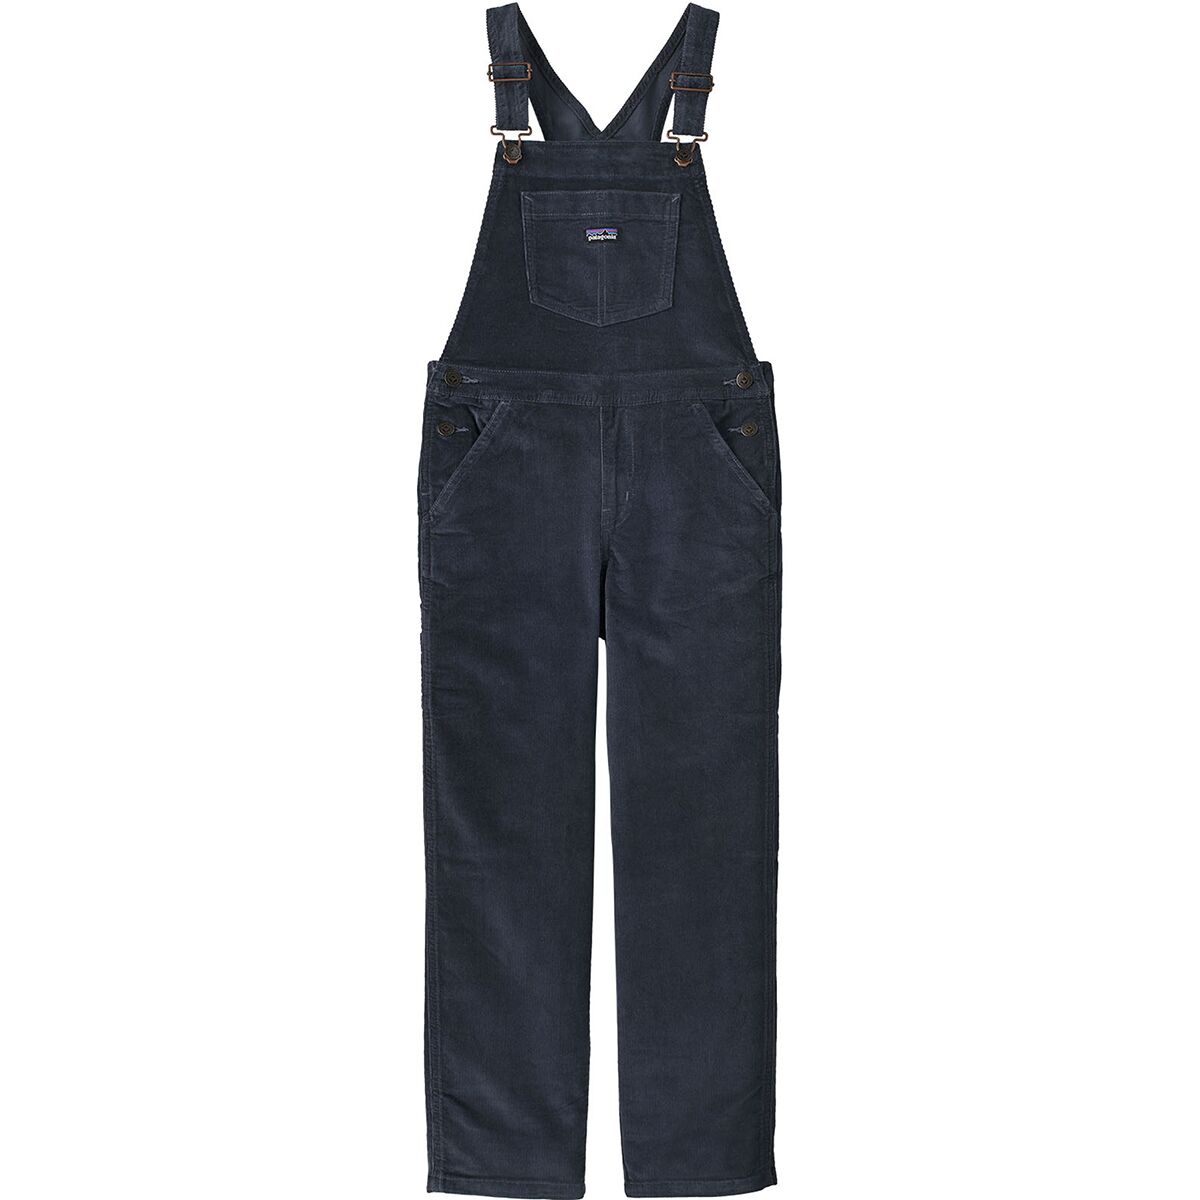 Patagonia Overall - Kids'